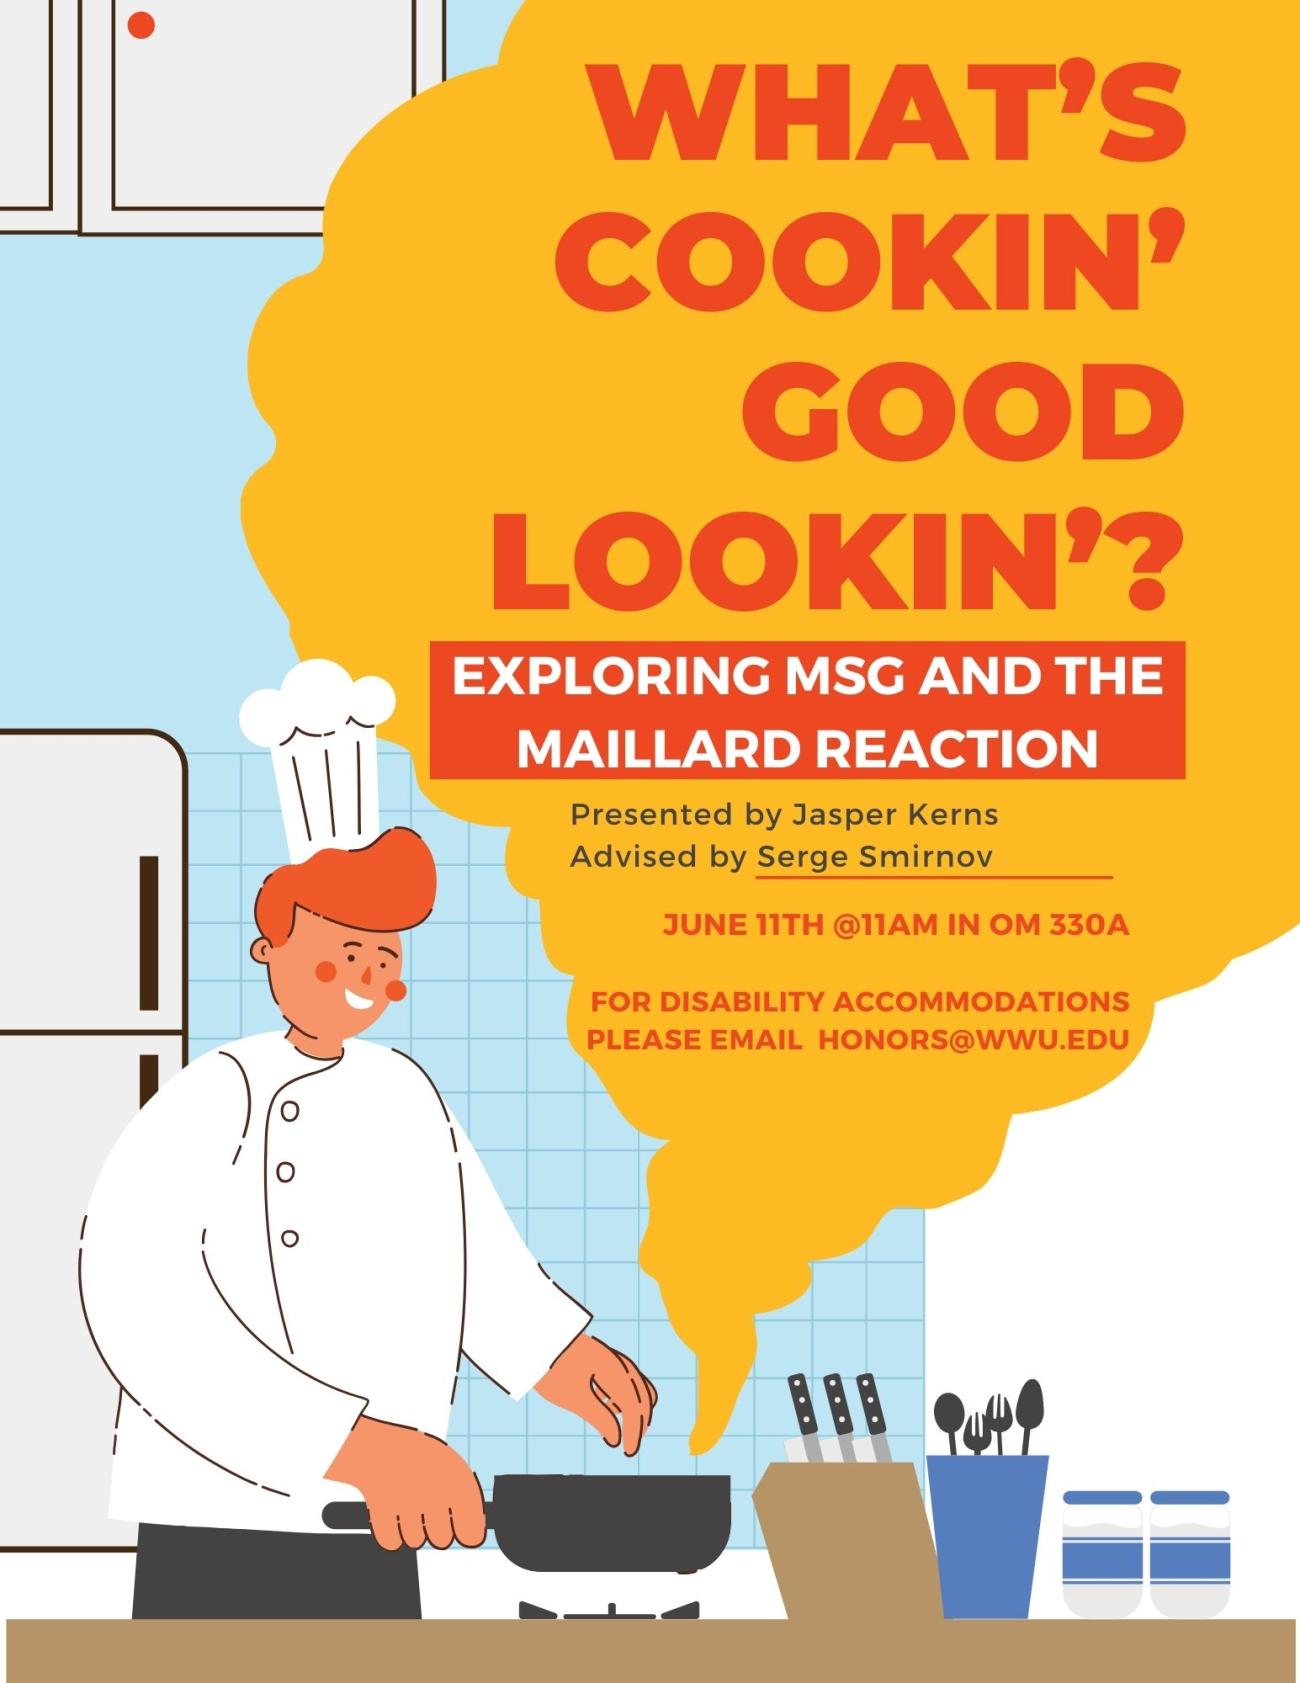 Cartoon representation of a kitchen. A smiling, red-headed chef handles a black pan over the counter that lets off yellow steam upon which the poster text is overlayed in red, black, and white. The text reads: "What’s Cookin’ Good Lookin’?: Exploring MSG and the Maillard Reaction, Presented by Jasper Kerns, Advised by Serge Smirnov, June 11th @11am in OM 330A, For disability accommodations please email Honors@wwu.edu."